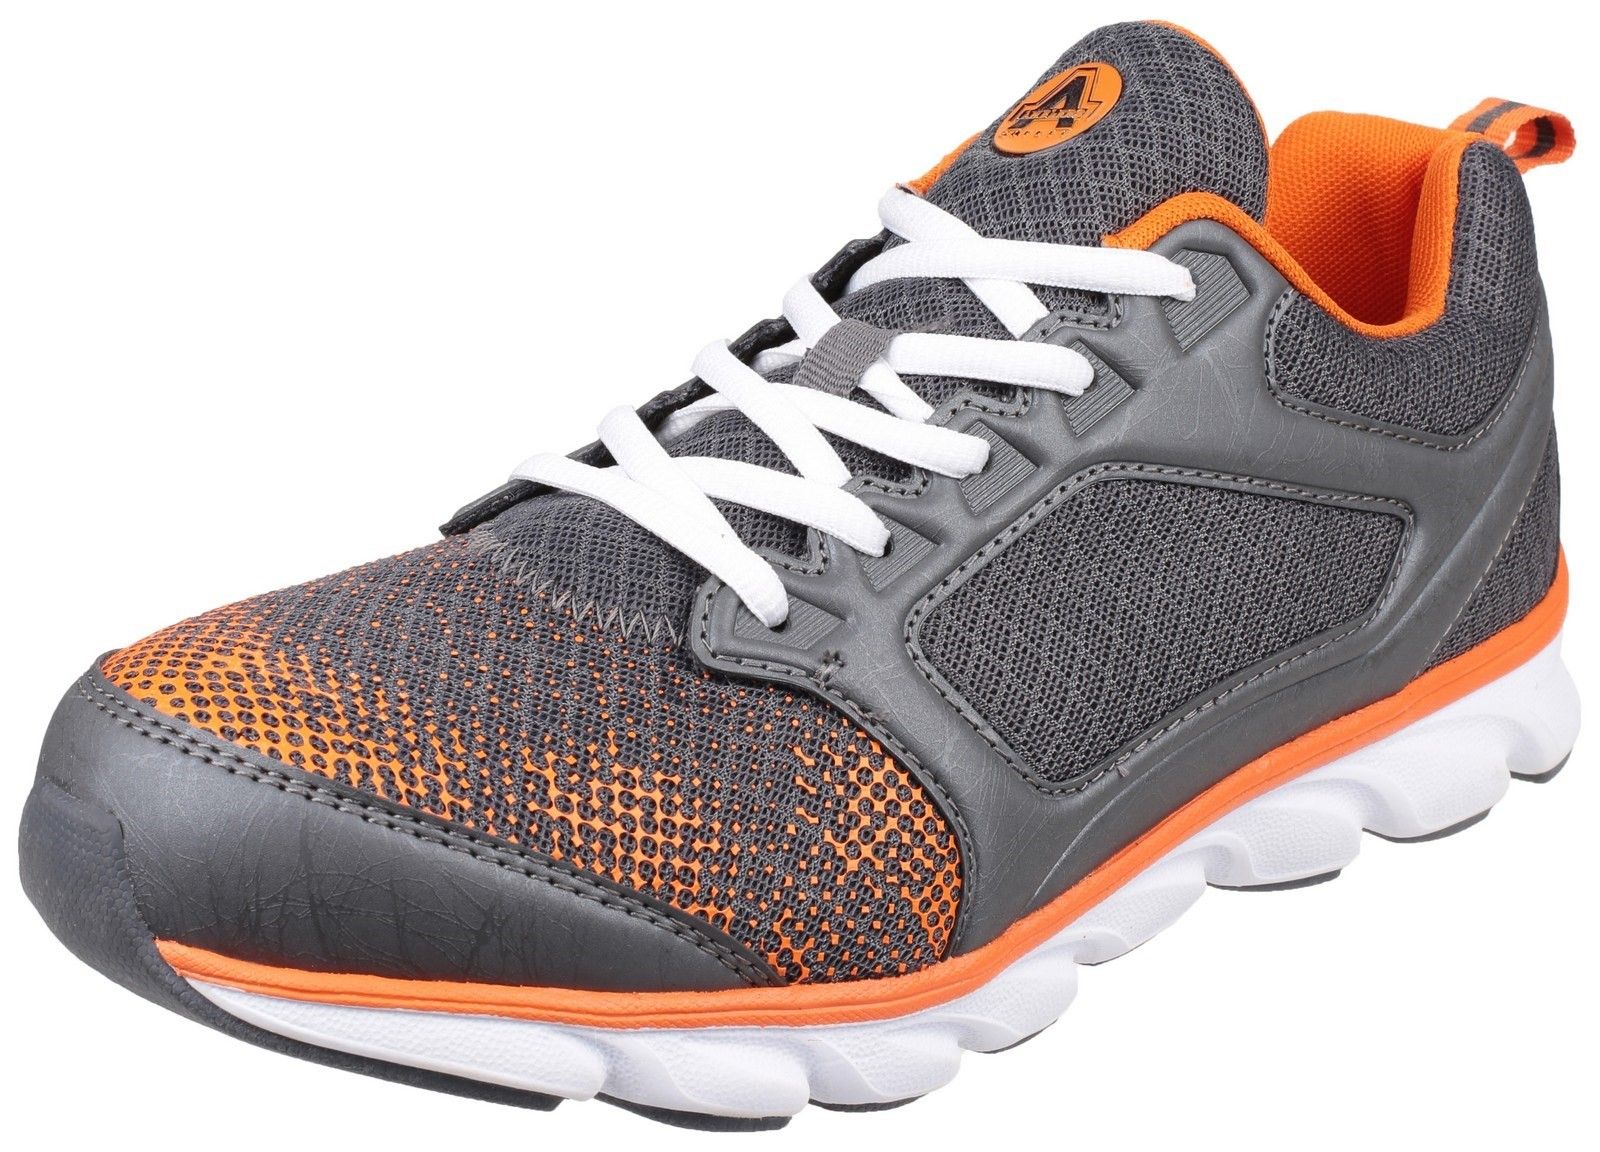 Lightweight sporty safety trainer with athletic breathable moisture wicking mesh upper and flexible traction EVA/Rubber outsoleNon-Leather PU & Mesh Upper. 
Moisture Wicking Breathable Mesh Lining. 
200 Joules Steel Toecap. 
Anti-penetration Non-Metal Midsole. 
Padded Mesh Collar and Tongue.